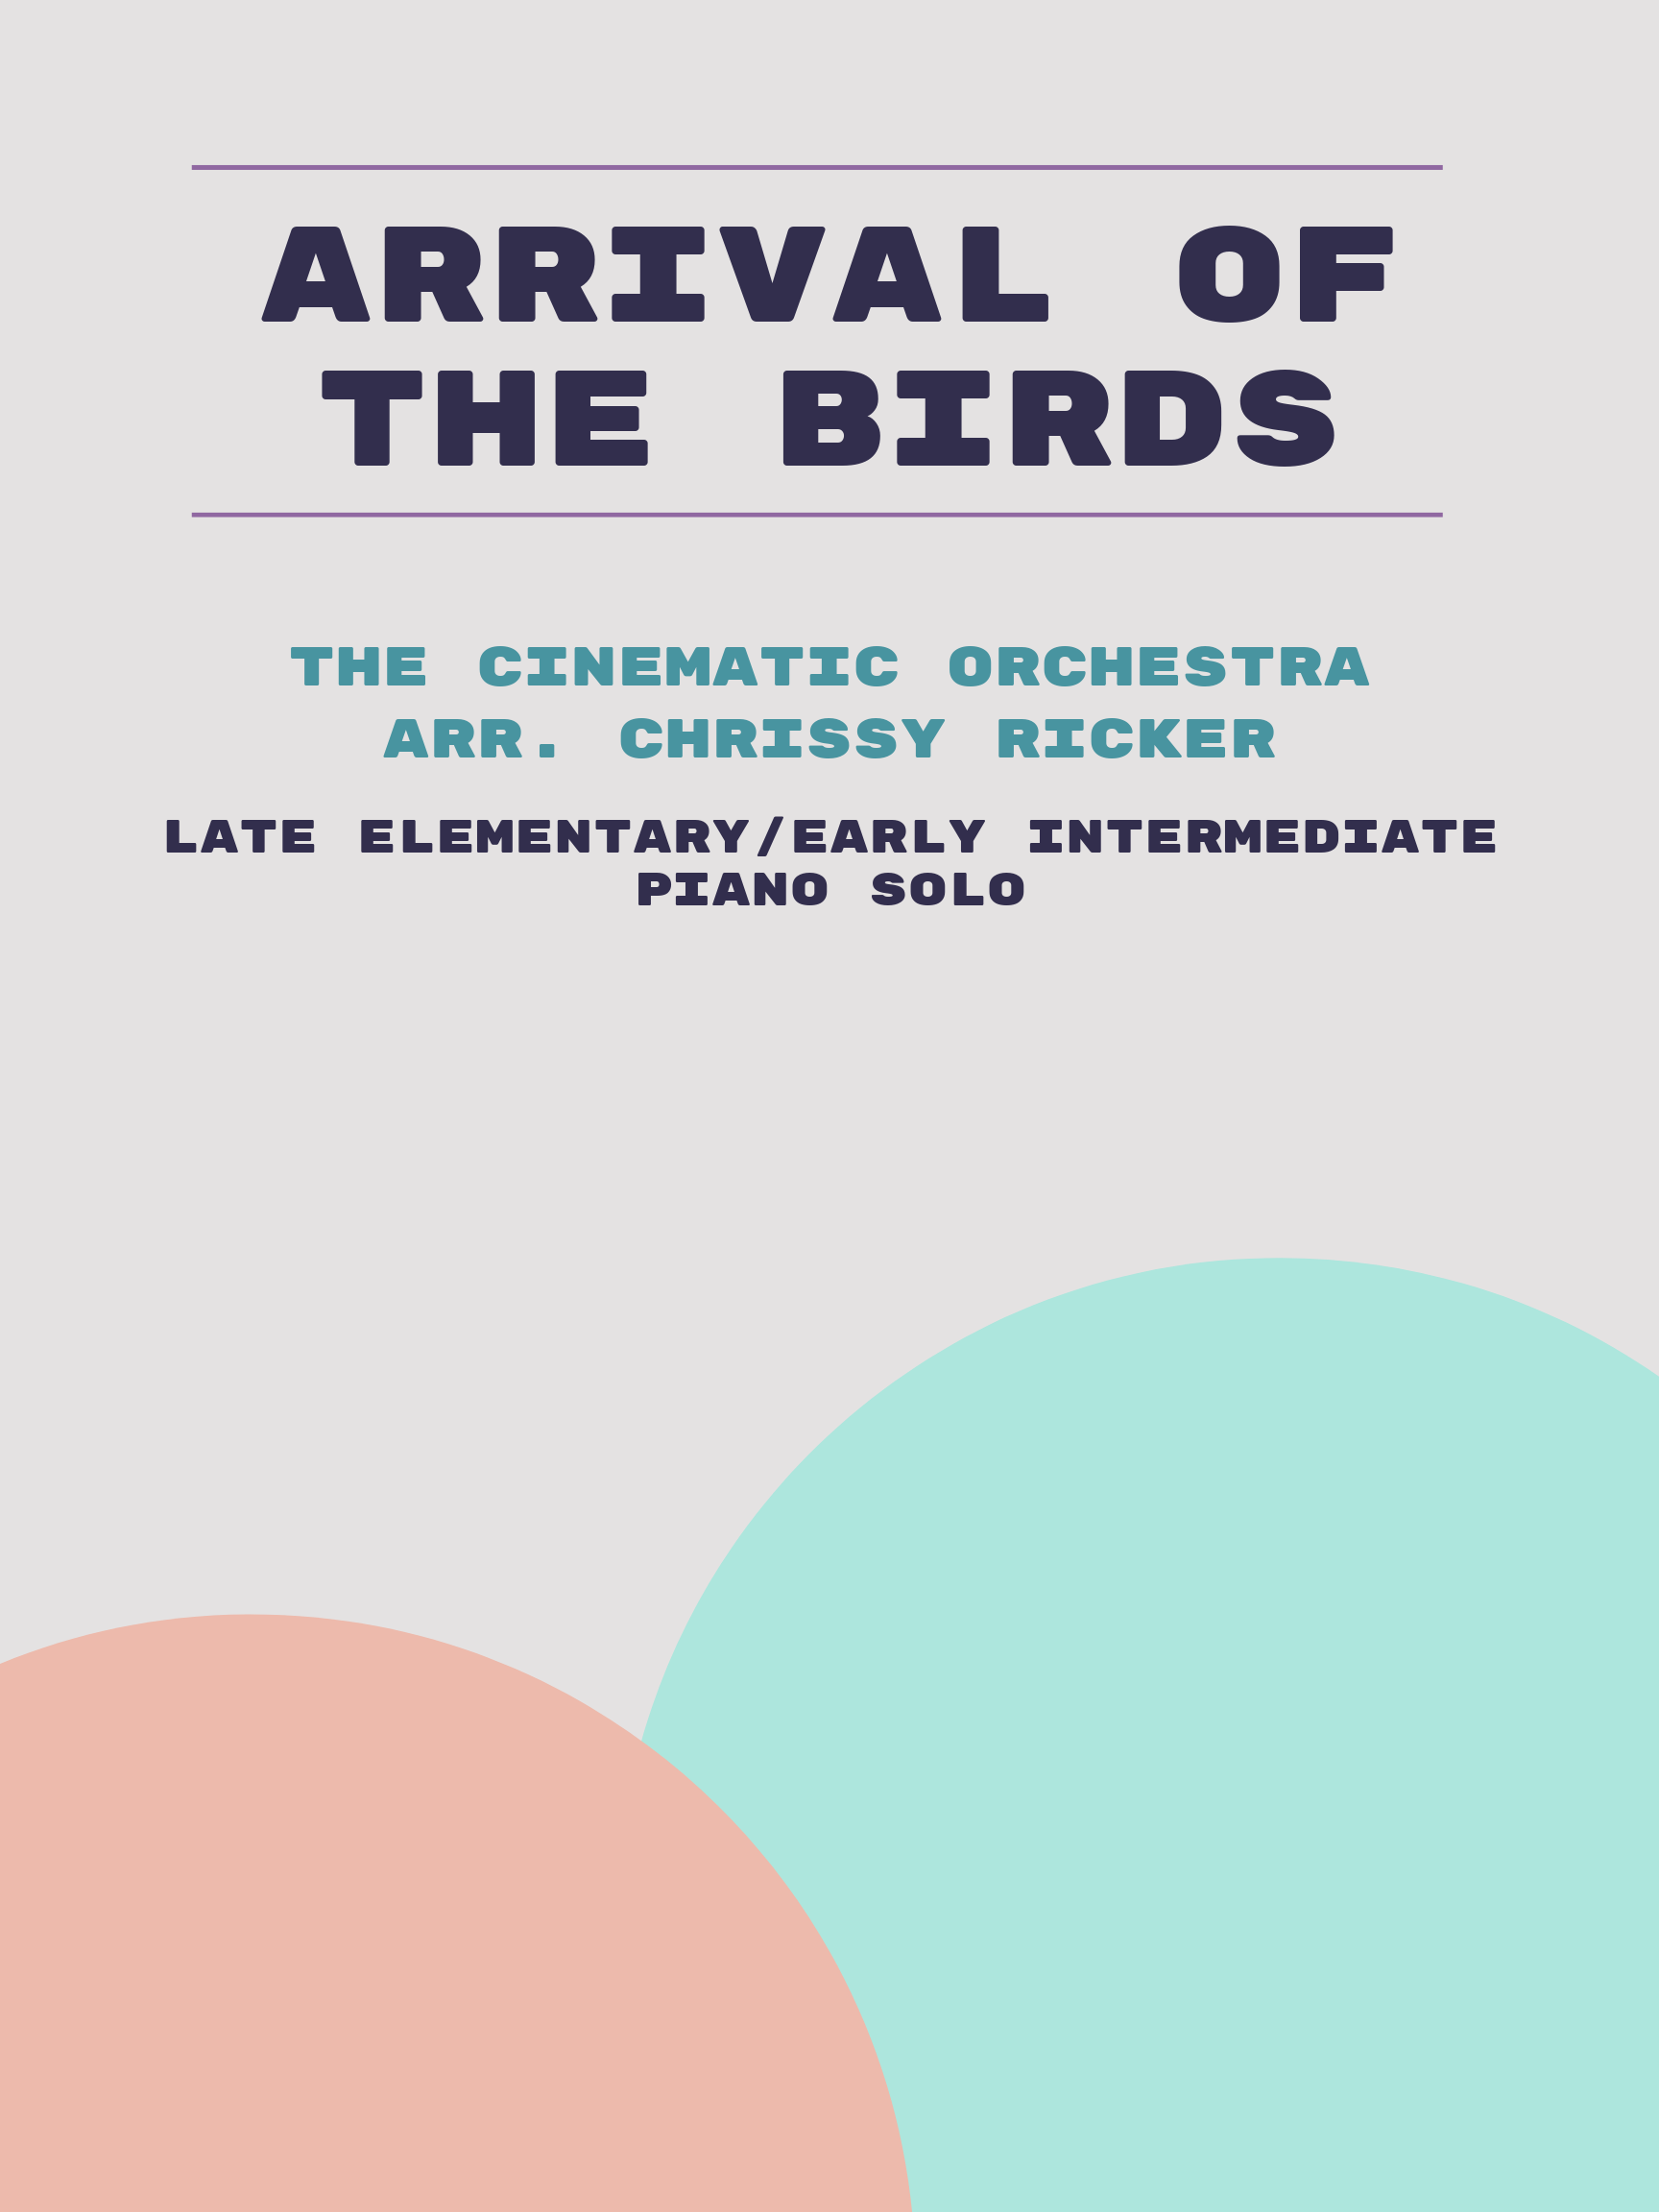 Arrival of the Birds by The Cinematic Orchestra